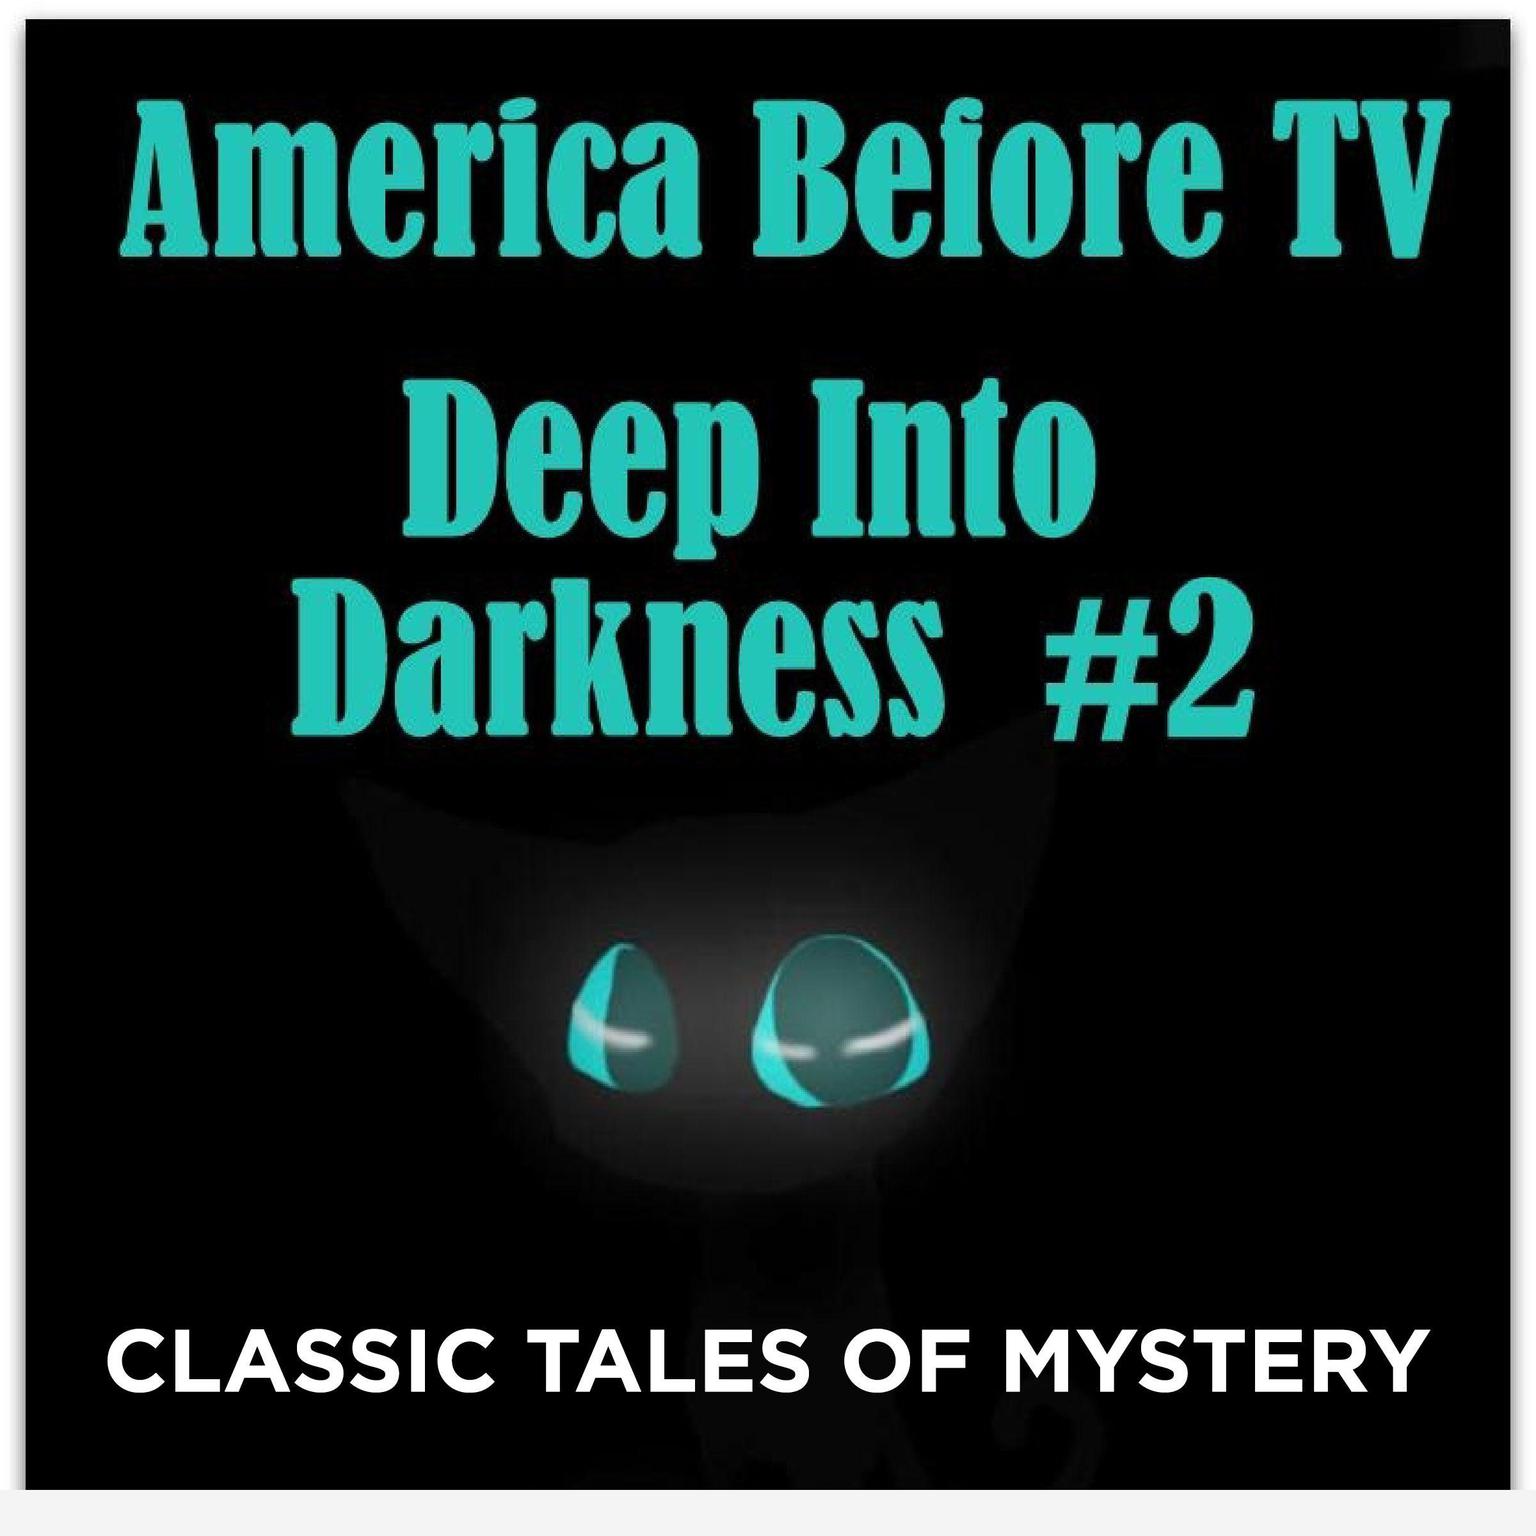 America Before TV - Deep Into Darkness  #2 (Abridged) Audiobook, by Classic Tales of Mystery